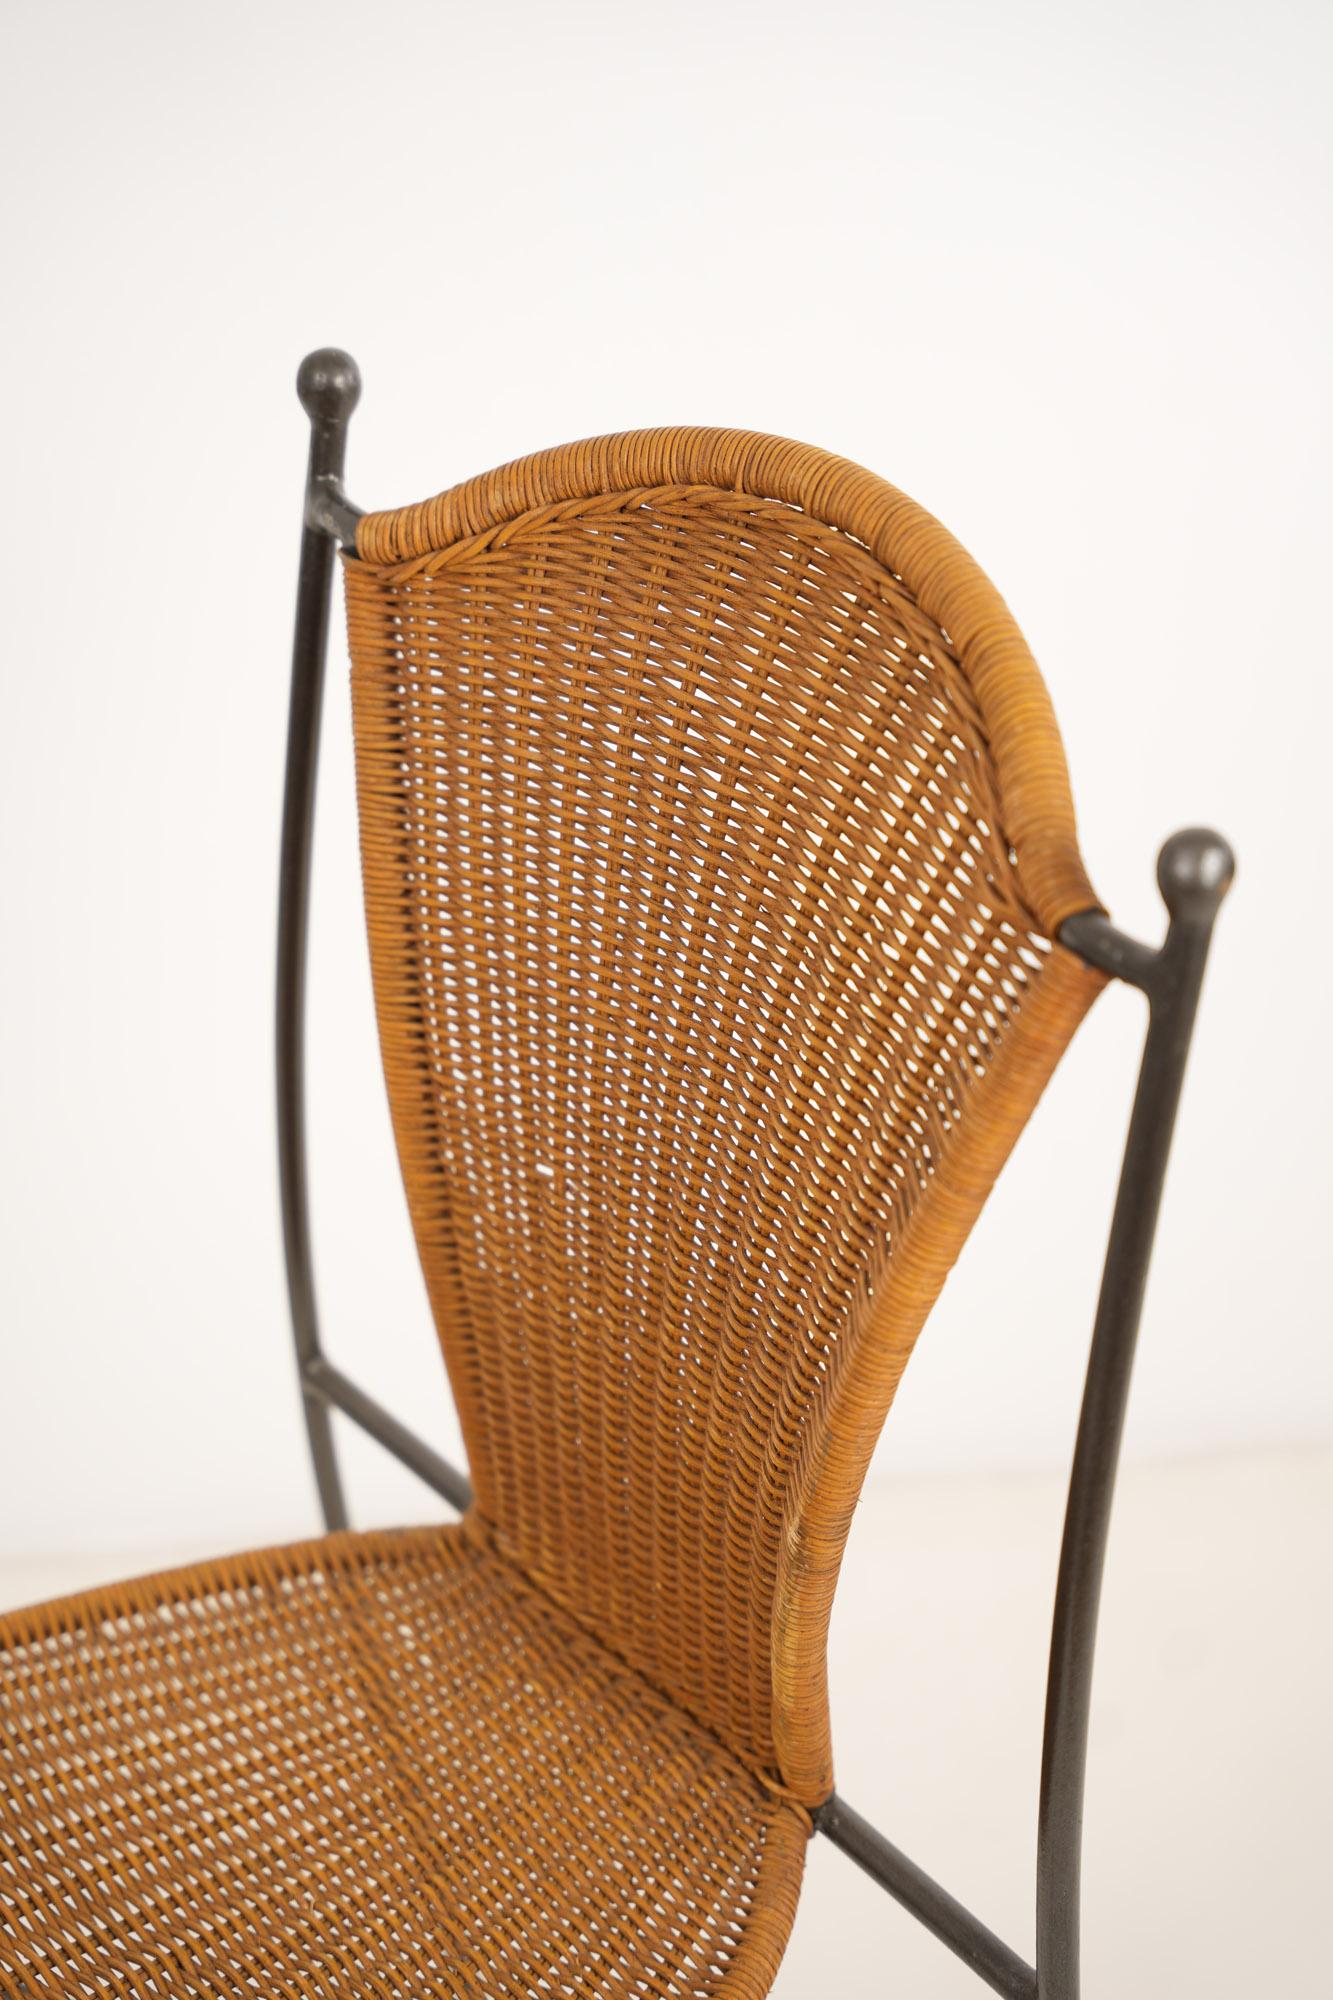 Wicker and Iron Chair By Frederic Weinberg 1950s In Good Condition For Sale In Čelinac, BA